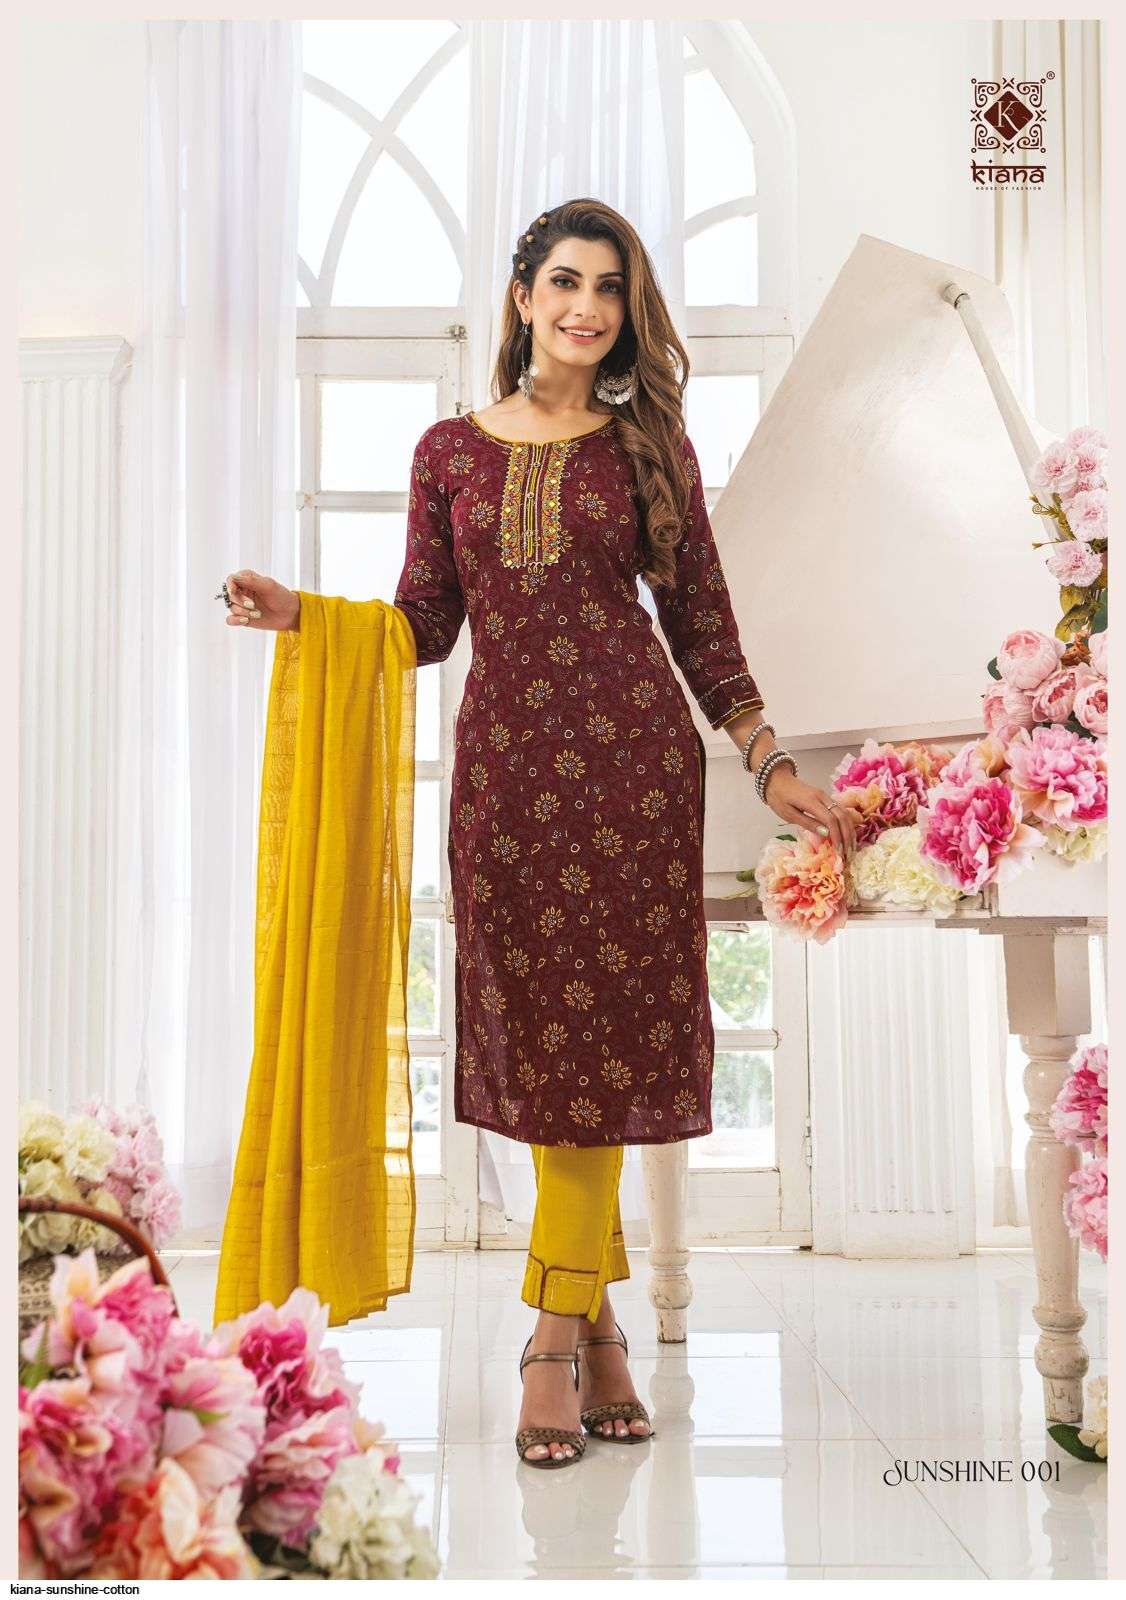 SUNSHINE BY KIANA 001 TO 008 SERIES BEAUTIFUL SUITS COLORFUL STYLISH FANCY CASUAL WEAR & ETHNIC WEAR COTTON PRINT DRESSES AT WHOLESALE PRICE